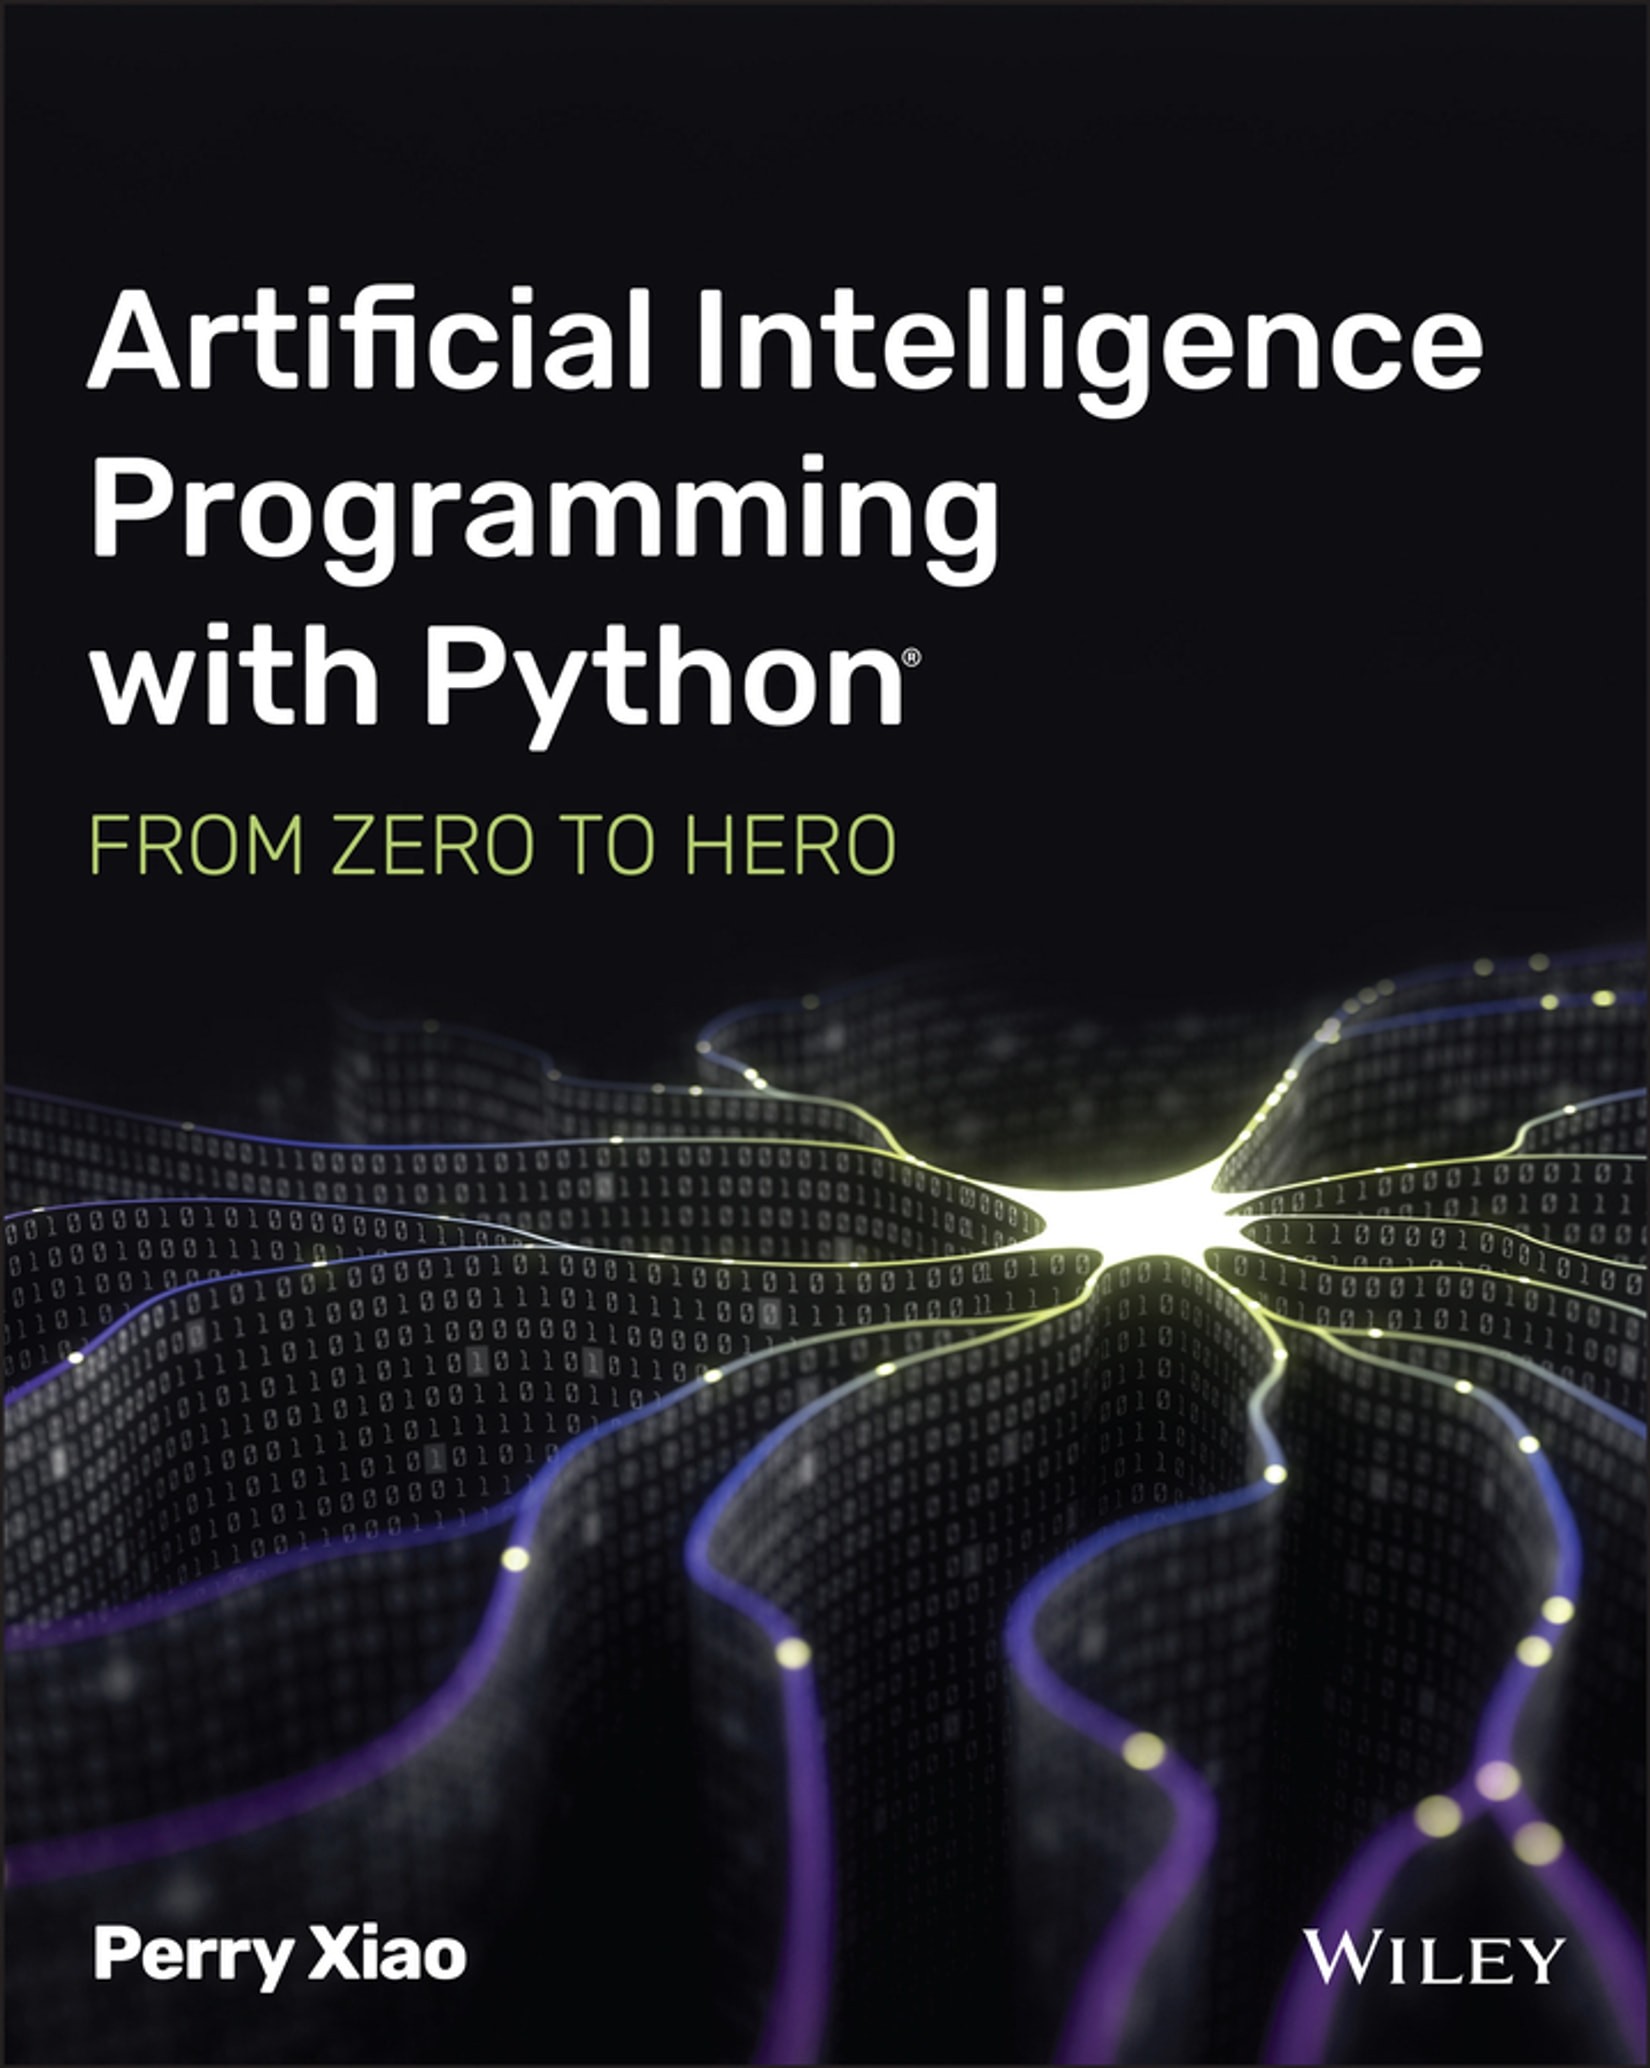 Artificial Intelligence Programming with Python - From Zero to Hero